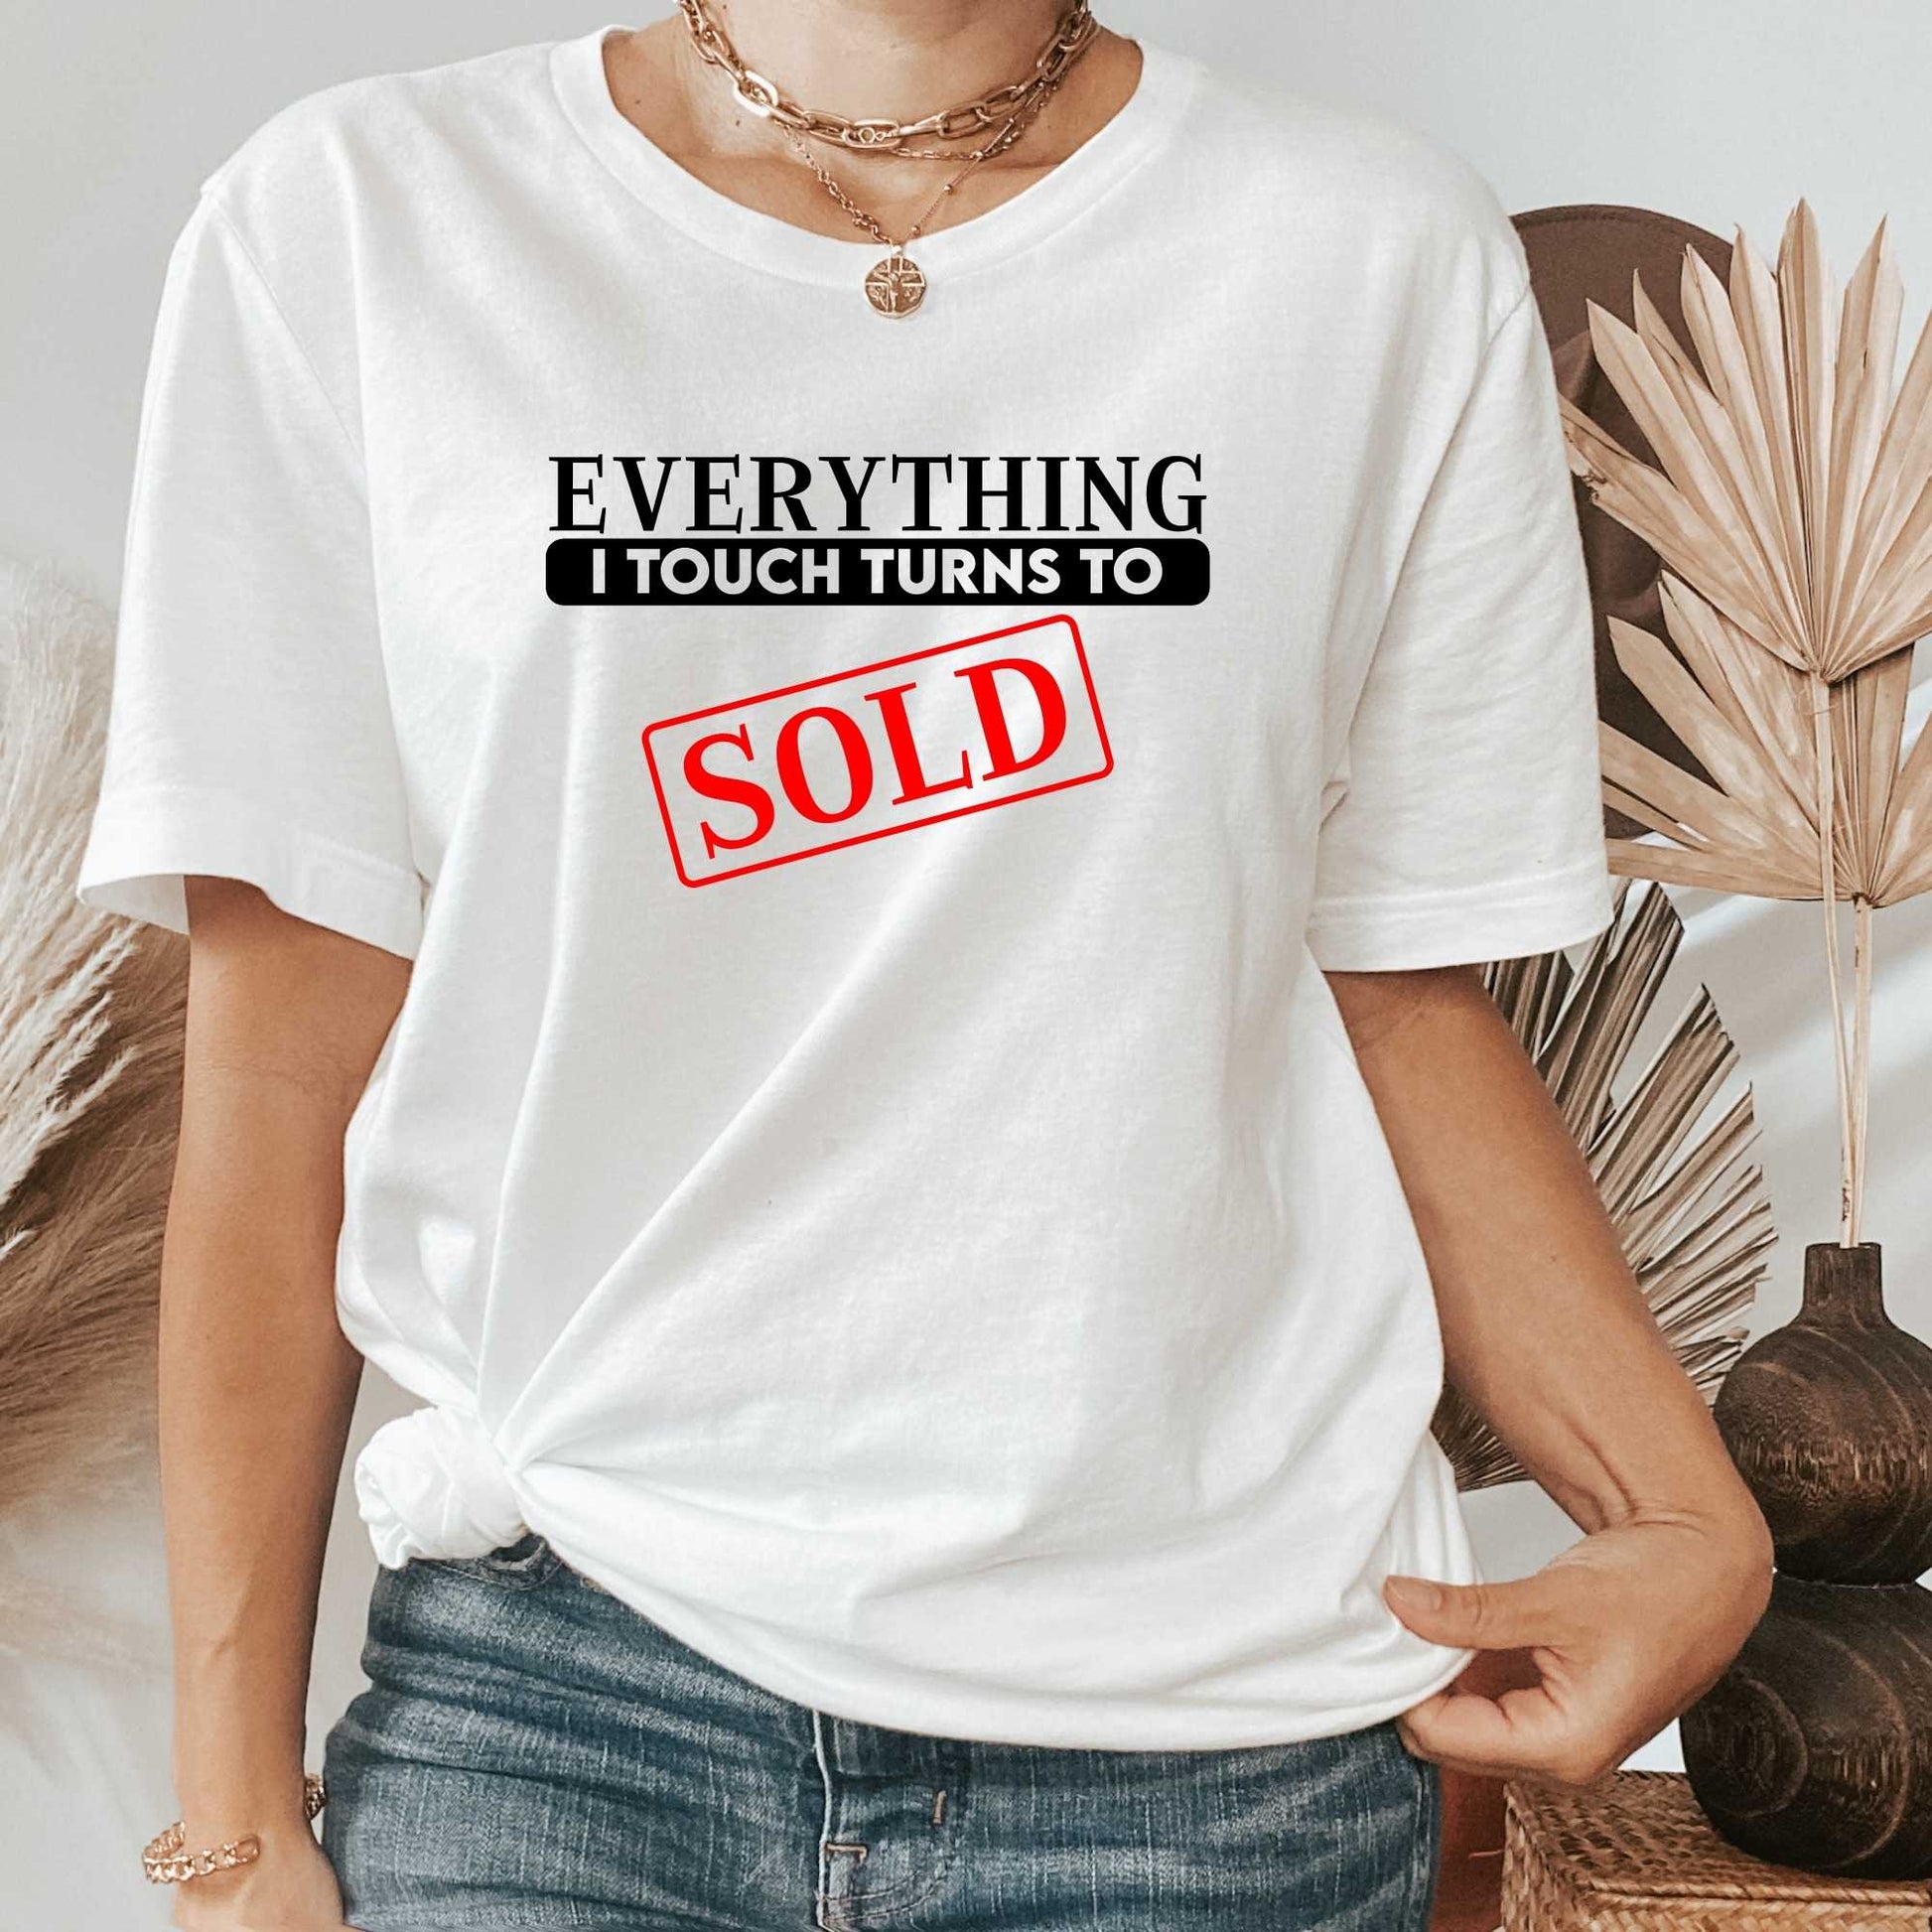 Sold Real Estate, Funny Real Estate Shirt, Real Estate Agent Gift, Great for Real Estate Marketing